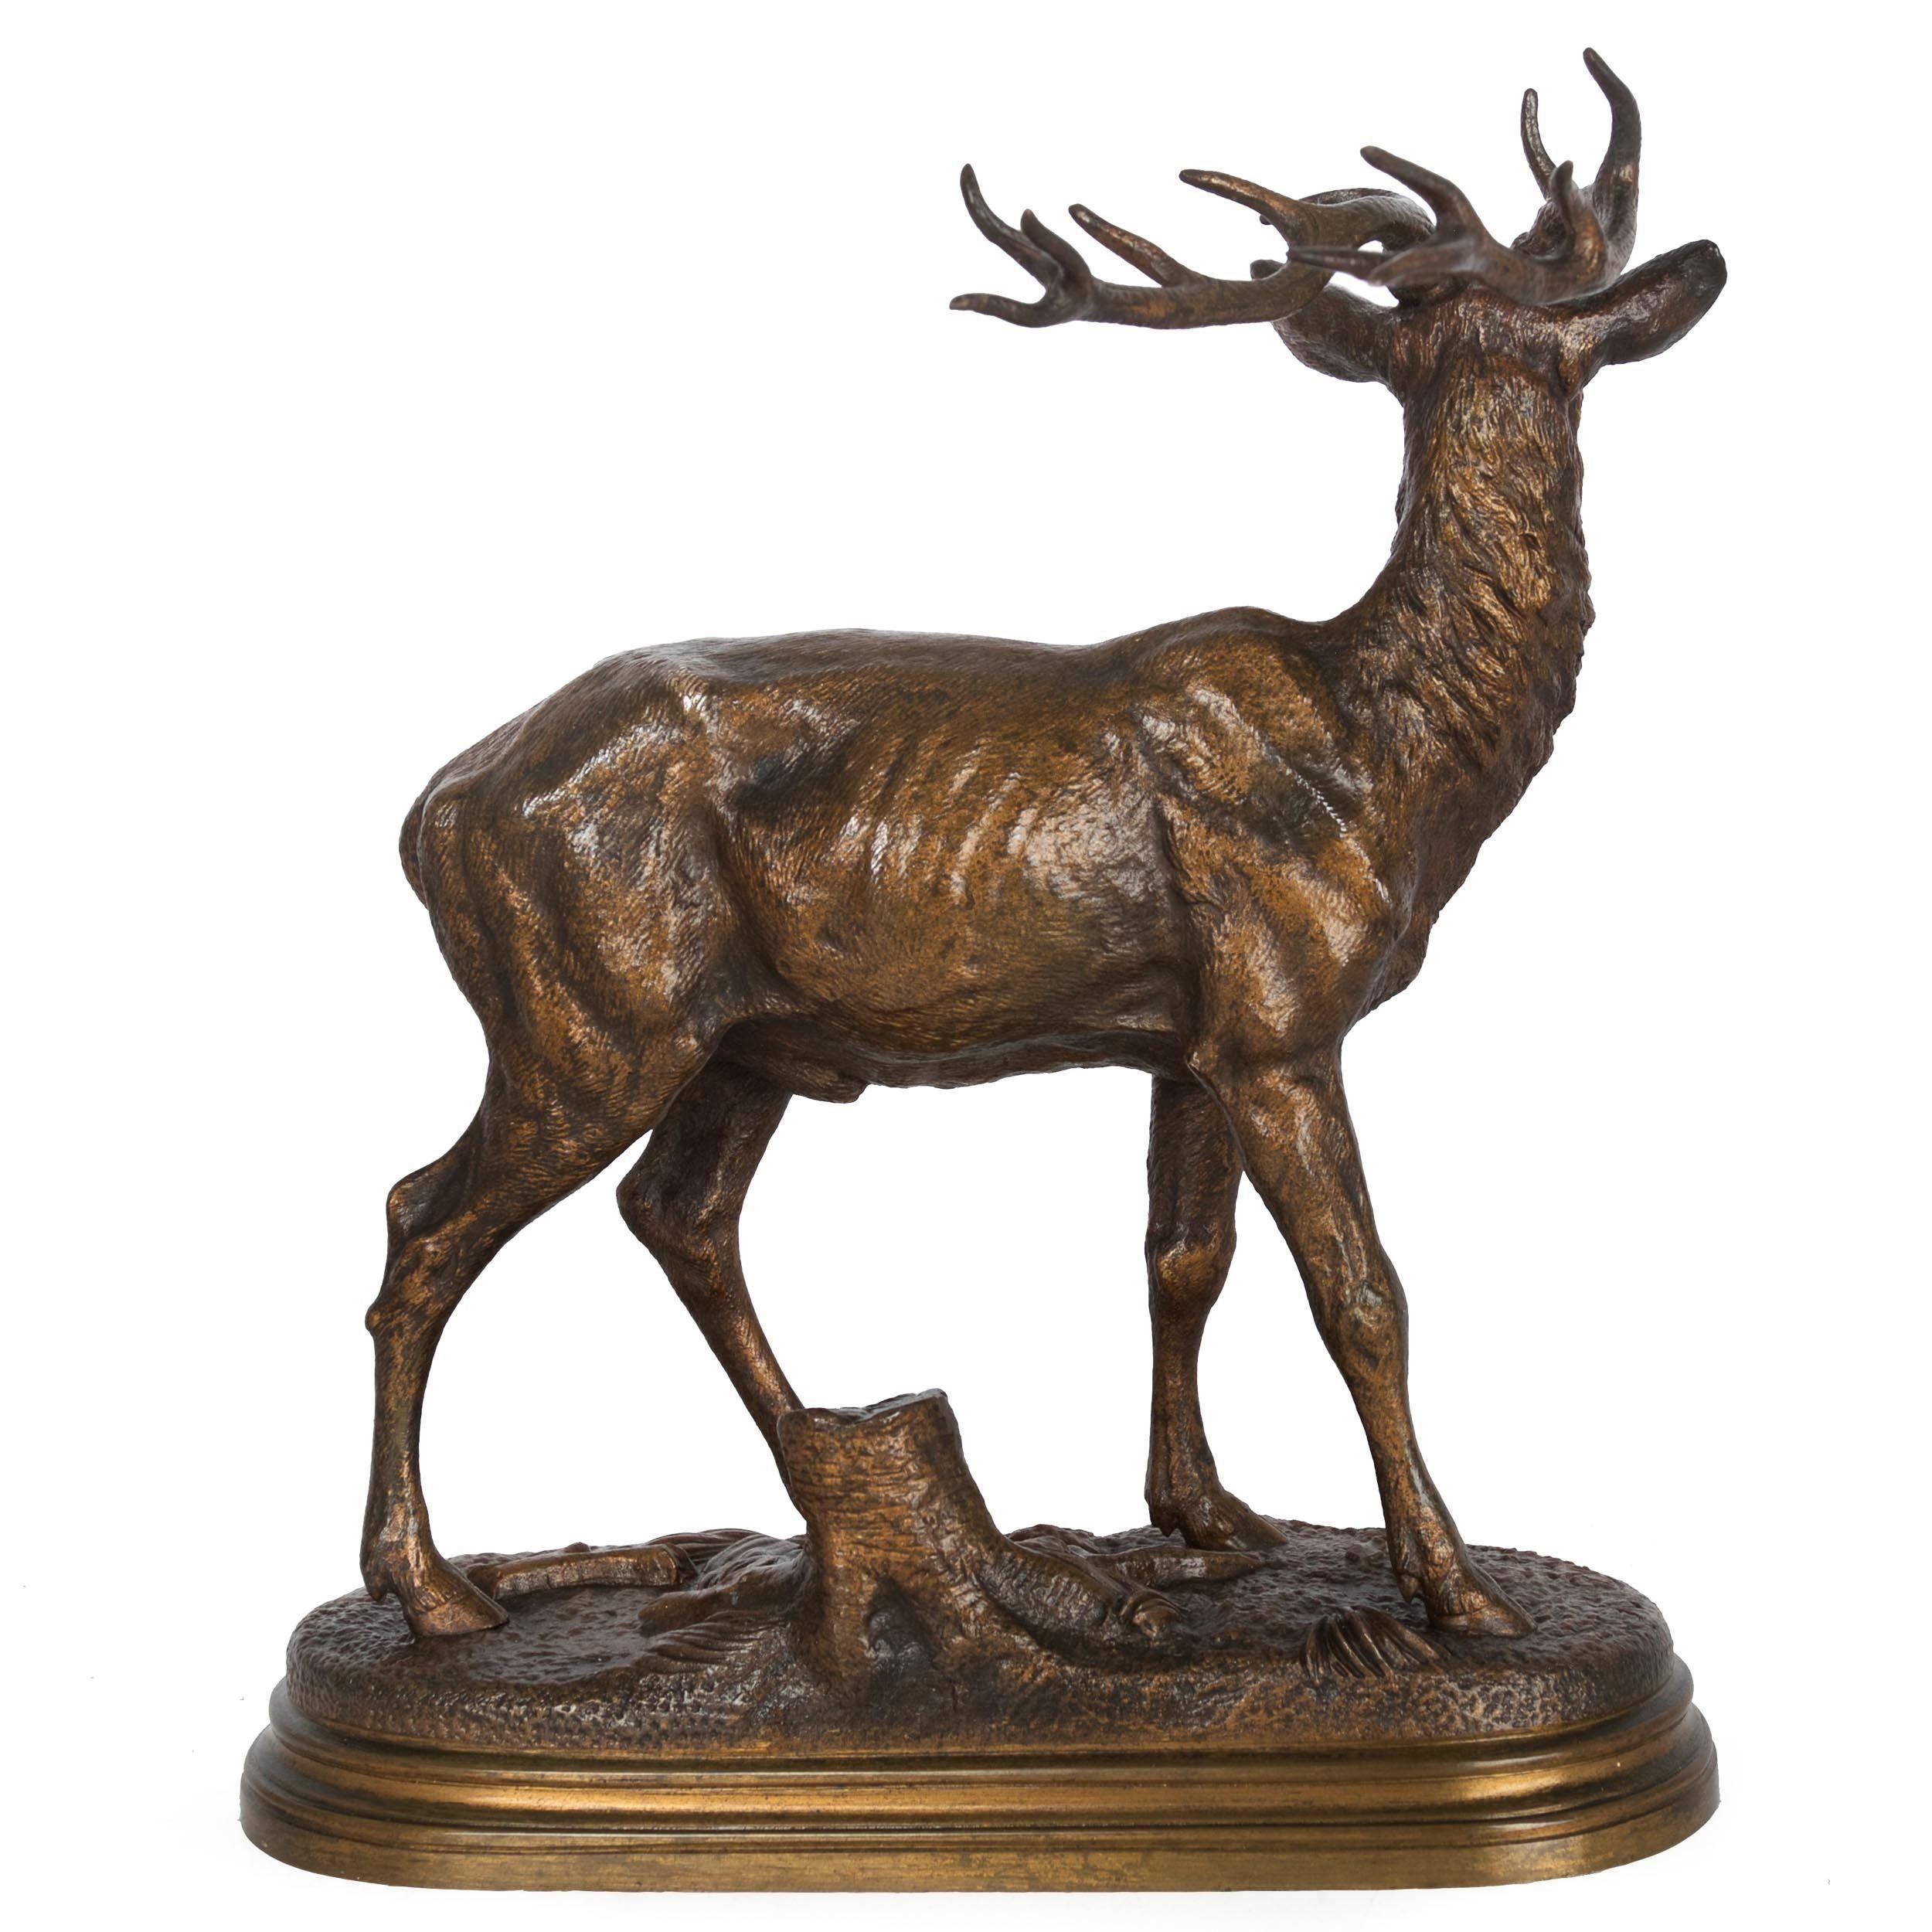 A beautifully textured model of Standing Stag by Alfred Dubucand, the sculpture features a wonderful all-over silky surface with fine overall texture captured directly from the mold with little cold-tooling evident. Individual hairs in the animal's